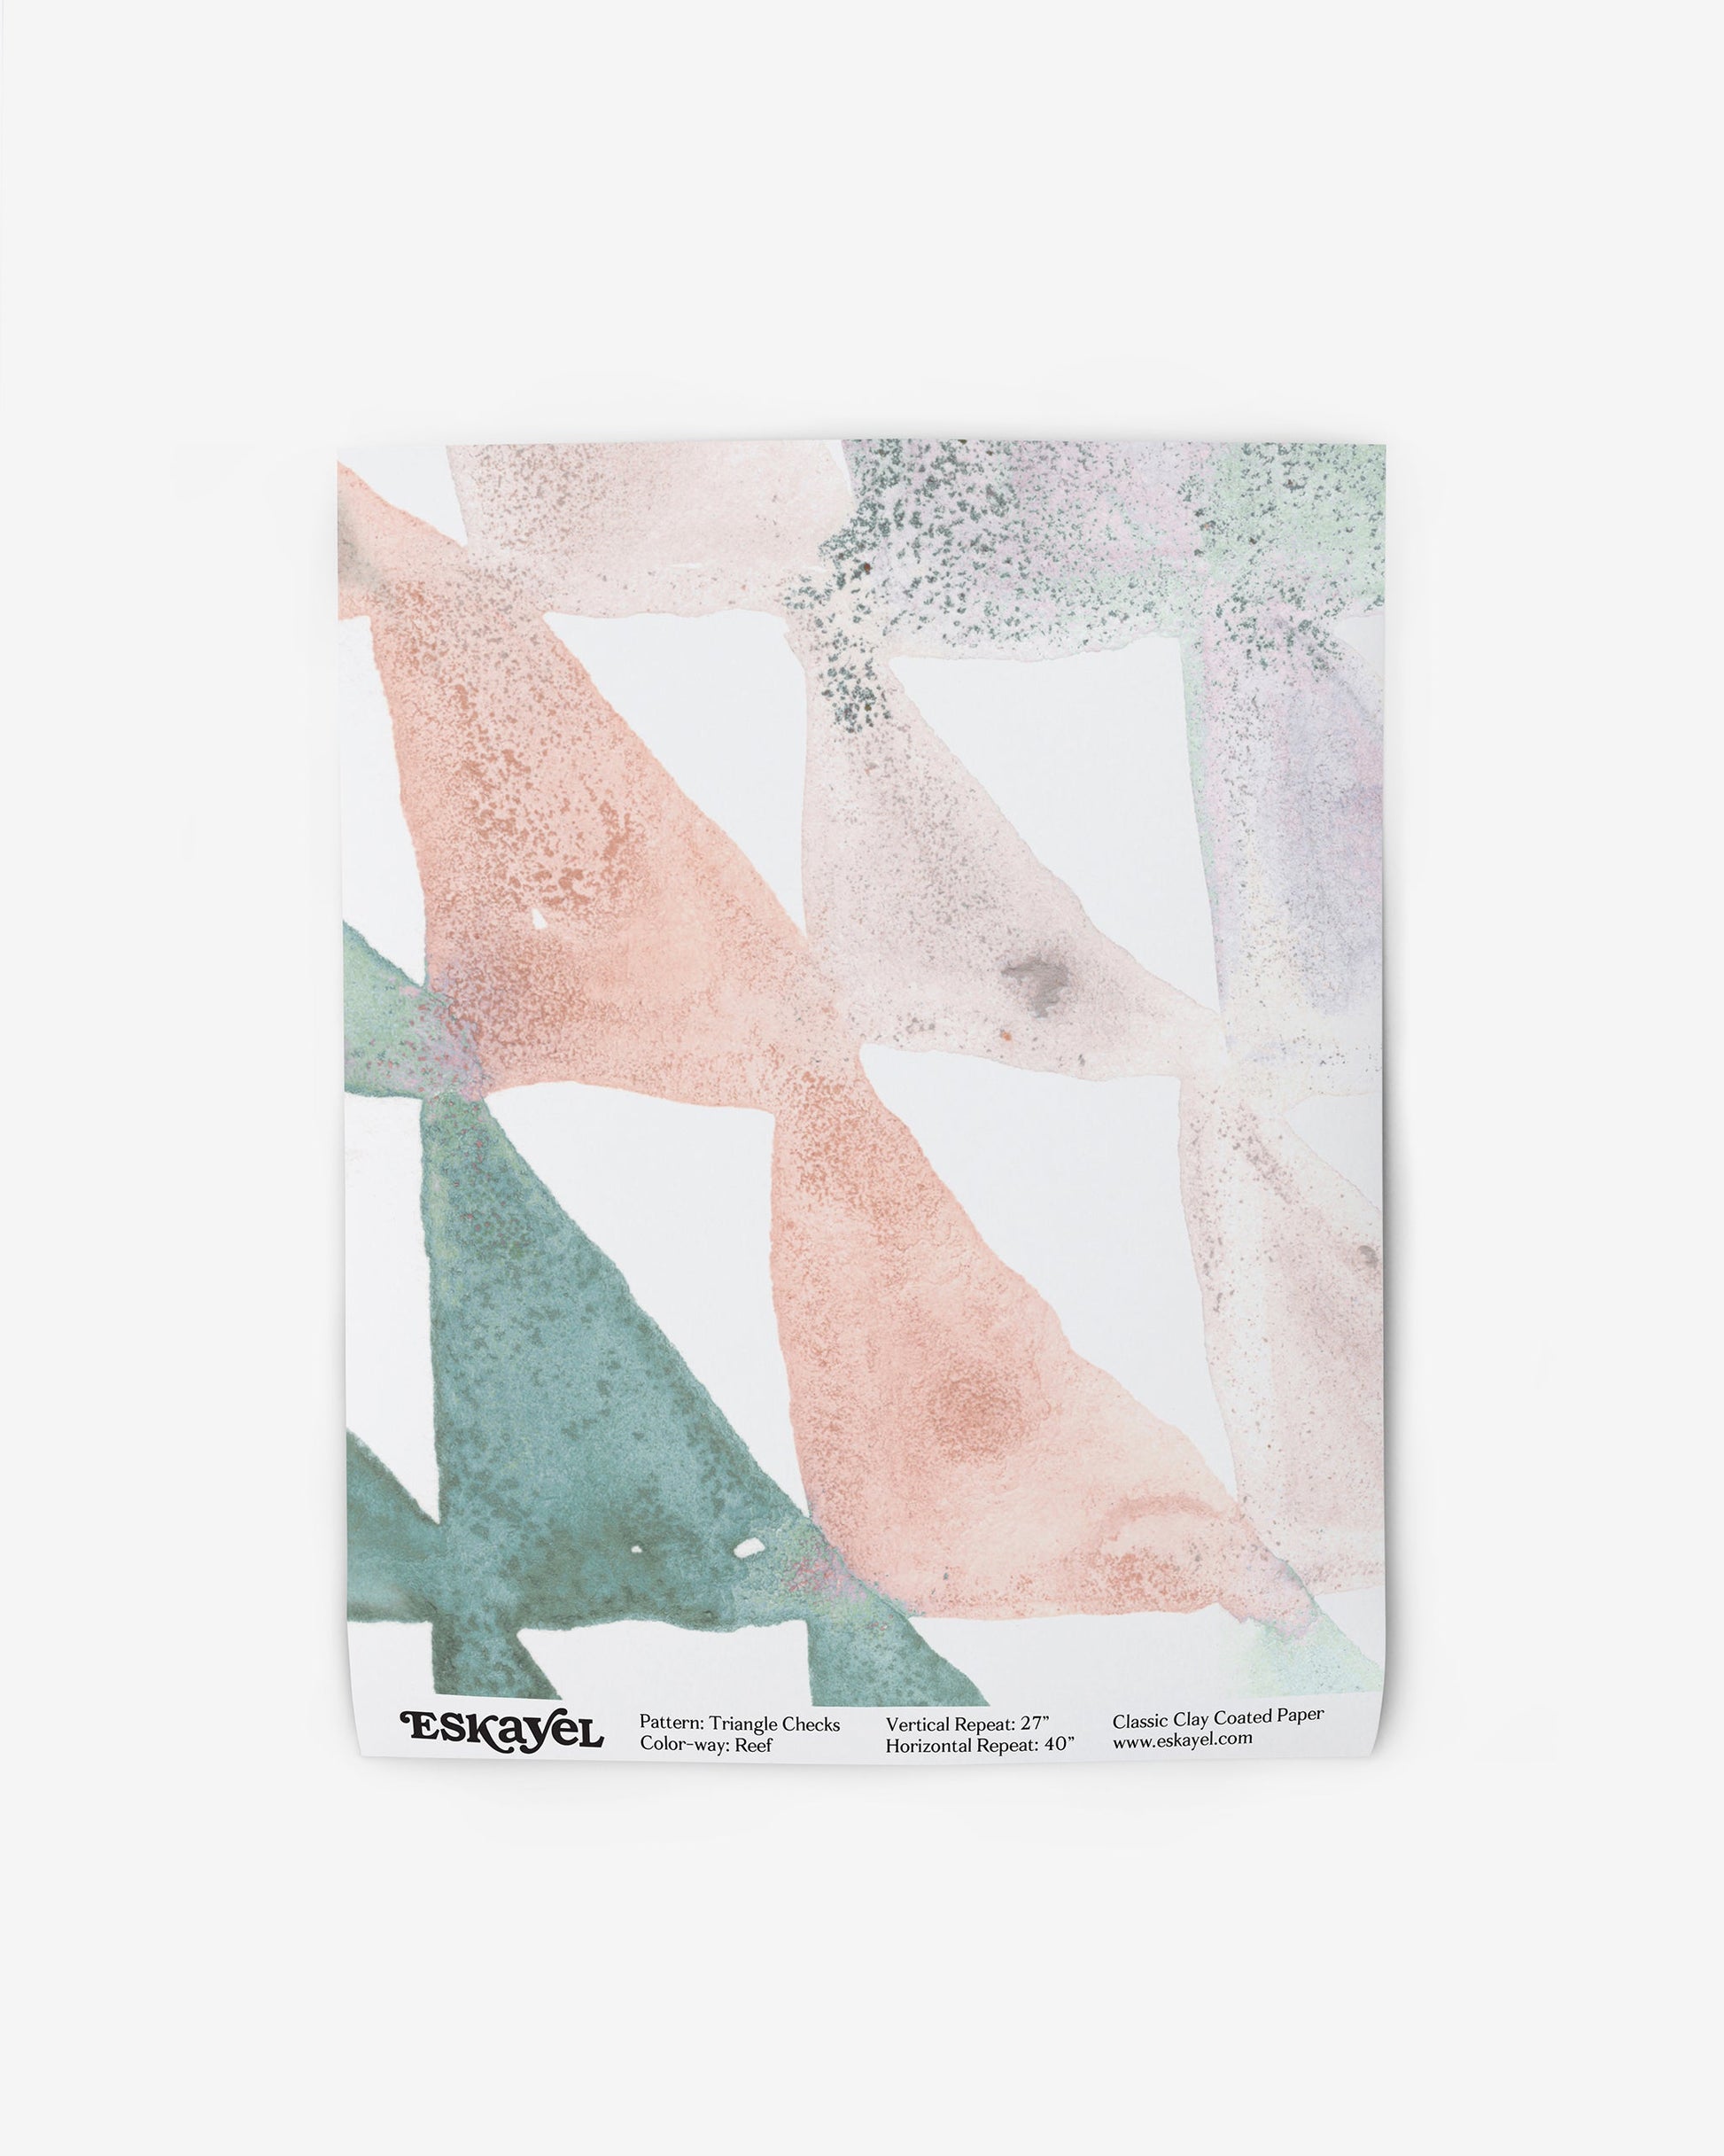 To order a sample of the Triangle Checks Wallpaper Sample||Reef with a pink, green, and blue pattern towel.